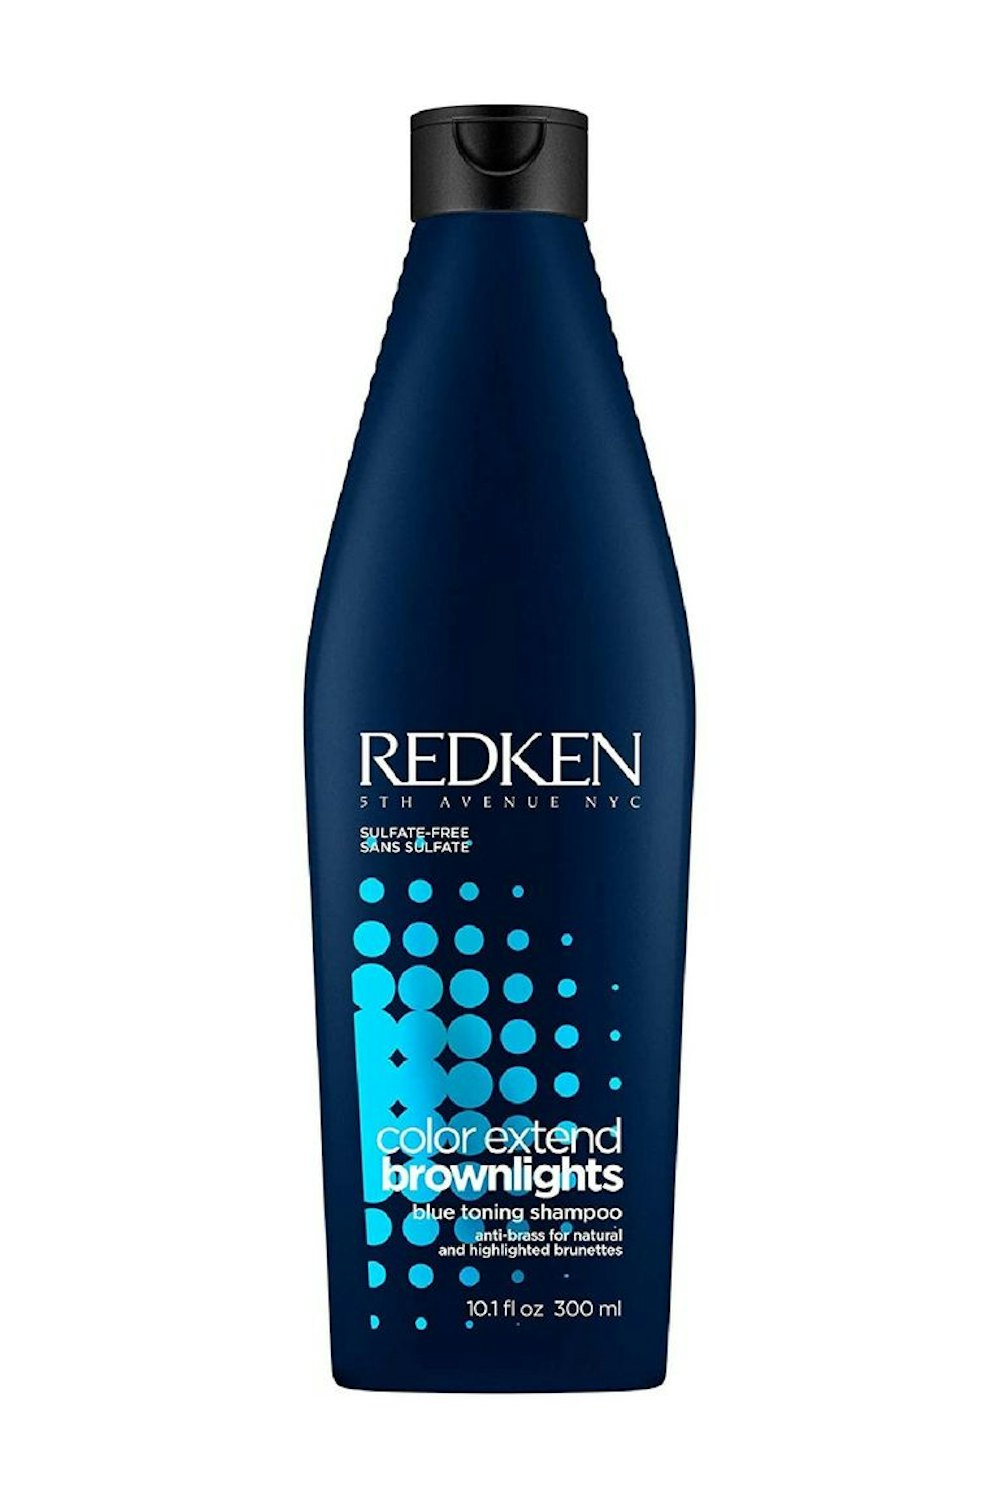 Brownlights Blue Toning Sulfate-Free Shampoo